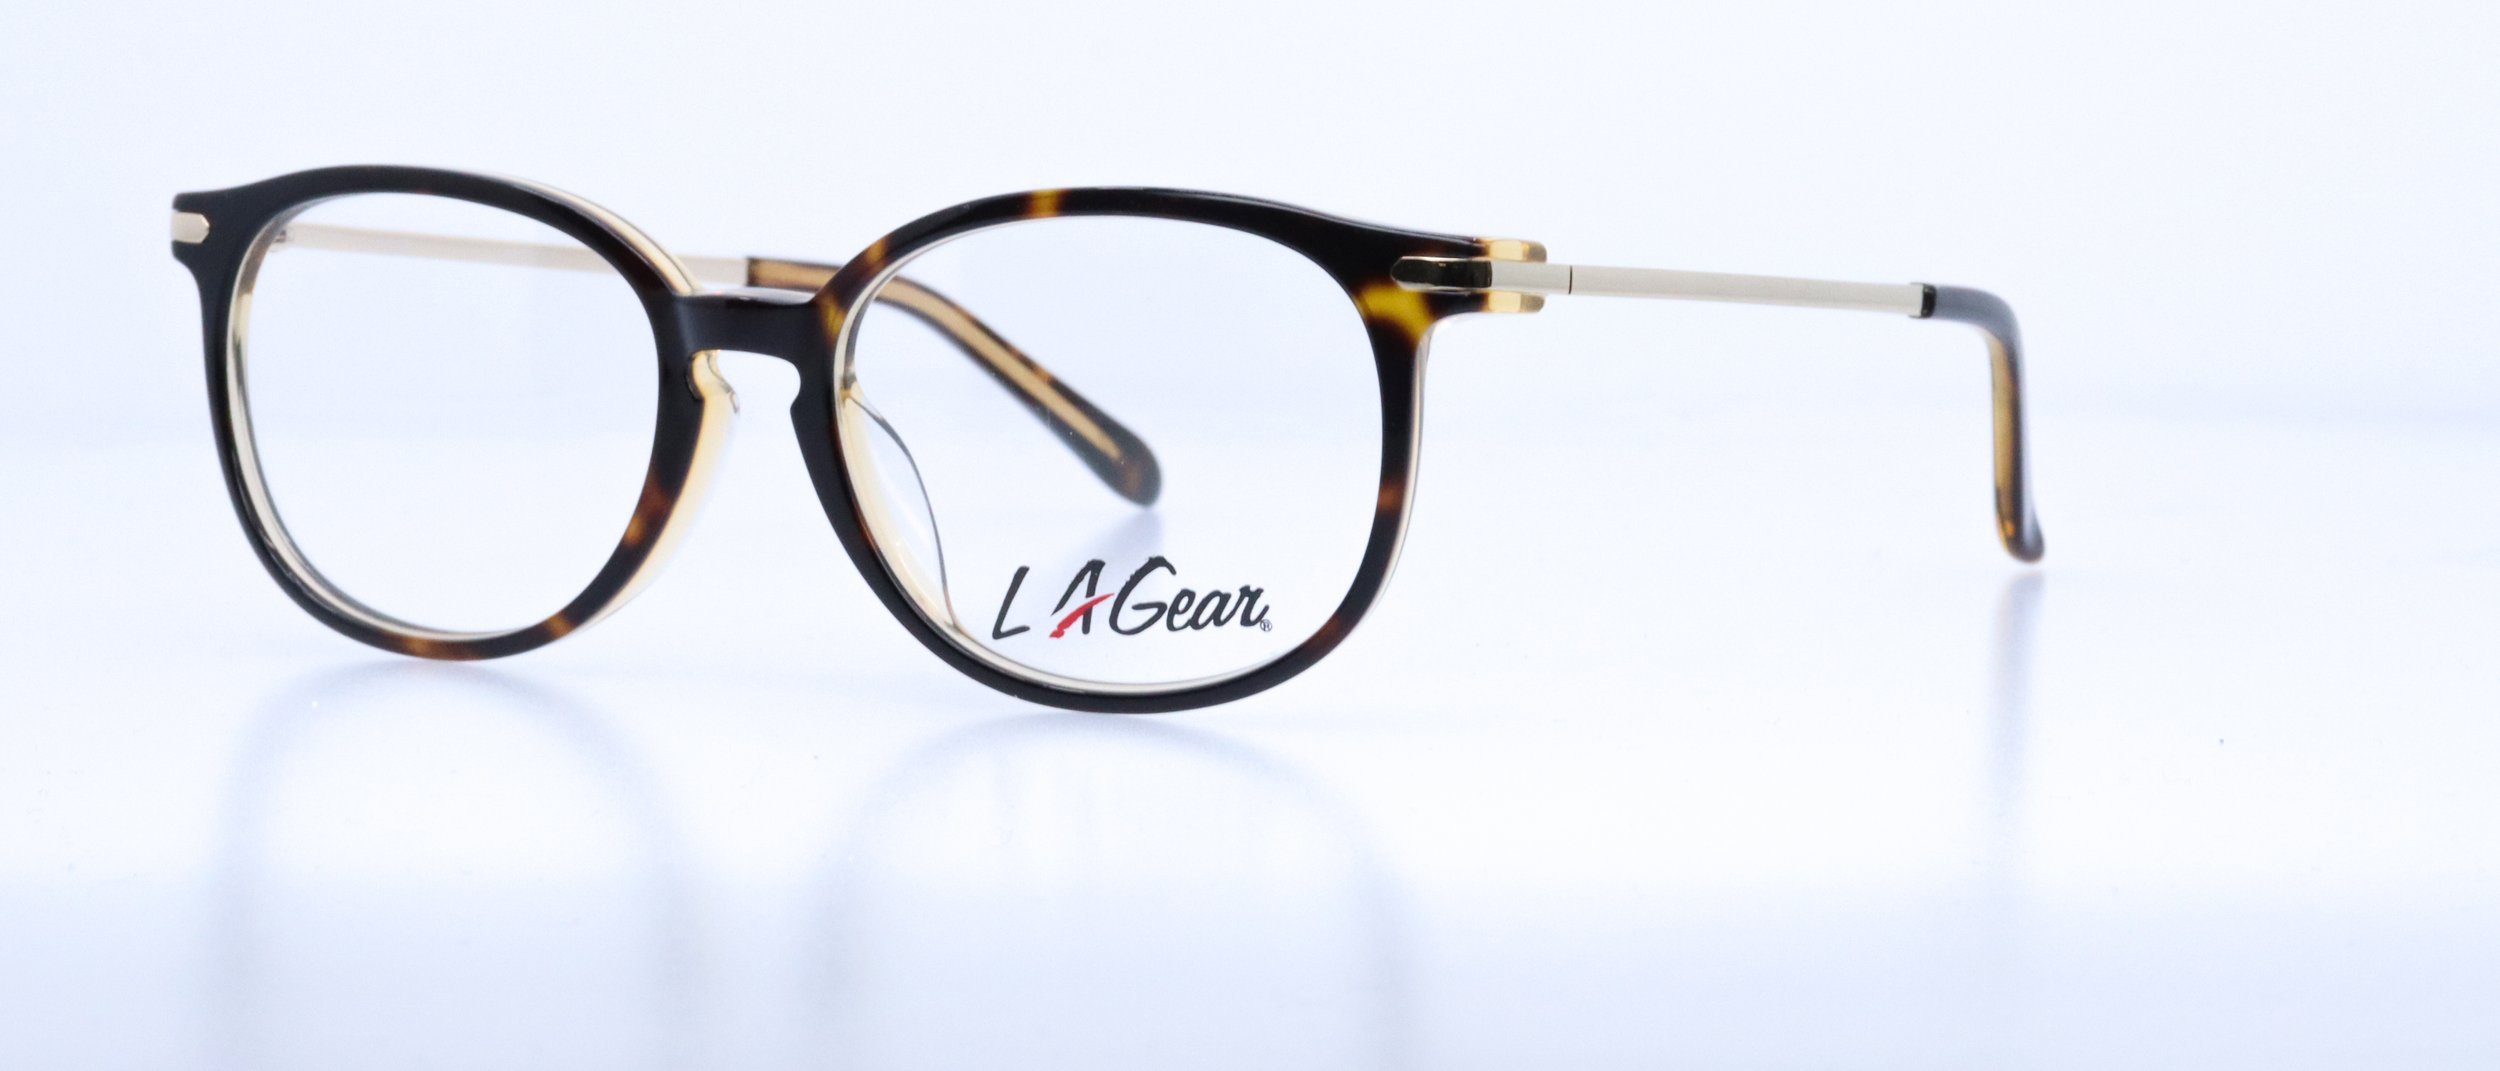  Arcadia: 50-16-135, Available in Blue/Tortoise or Tortoise/Tan 